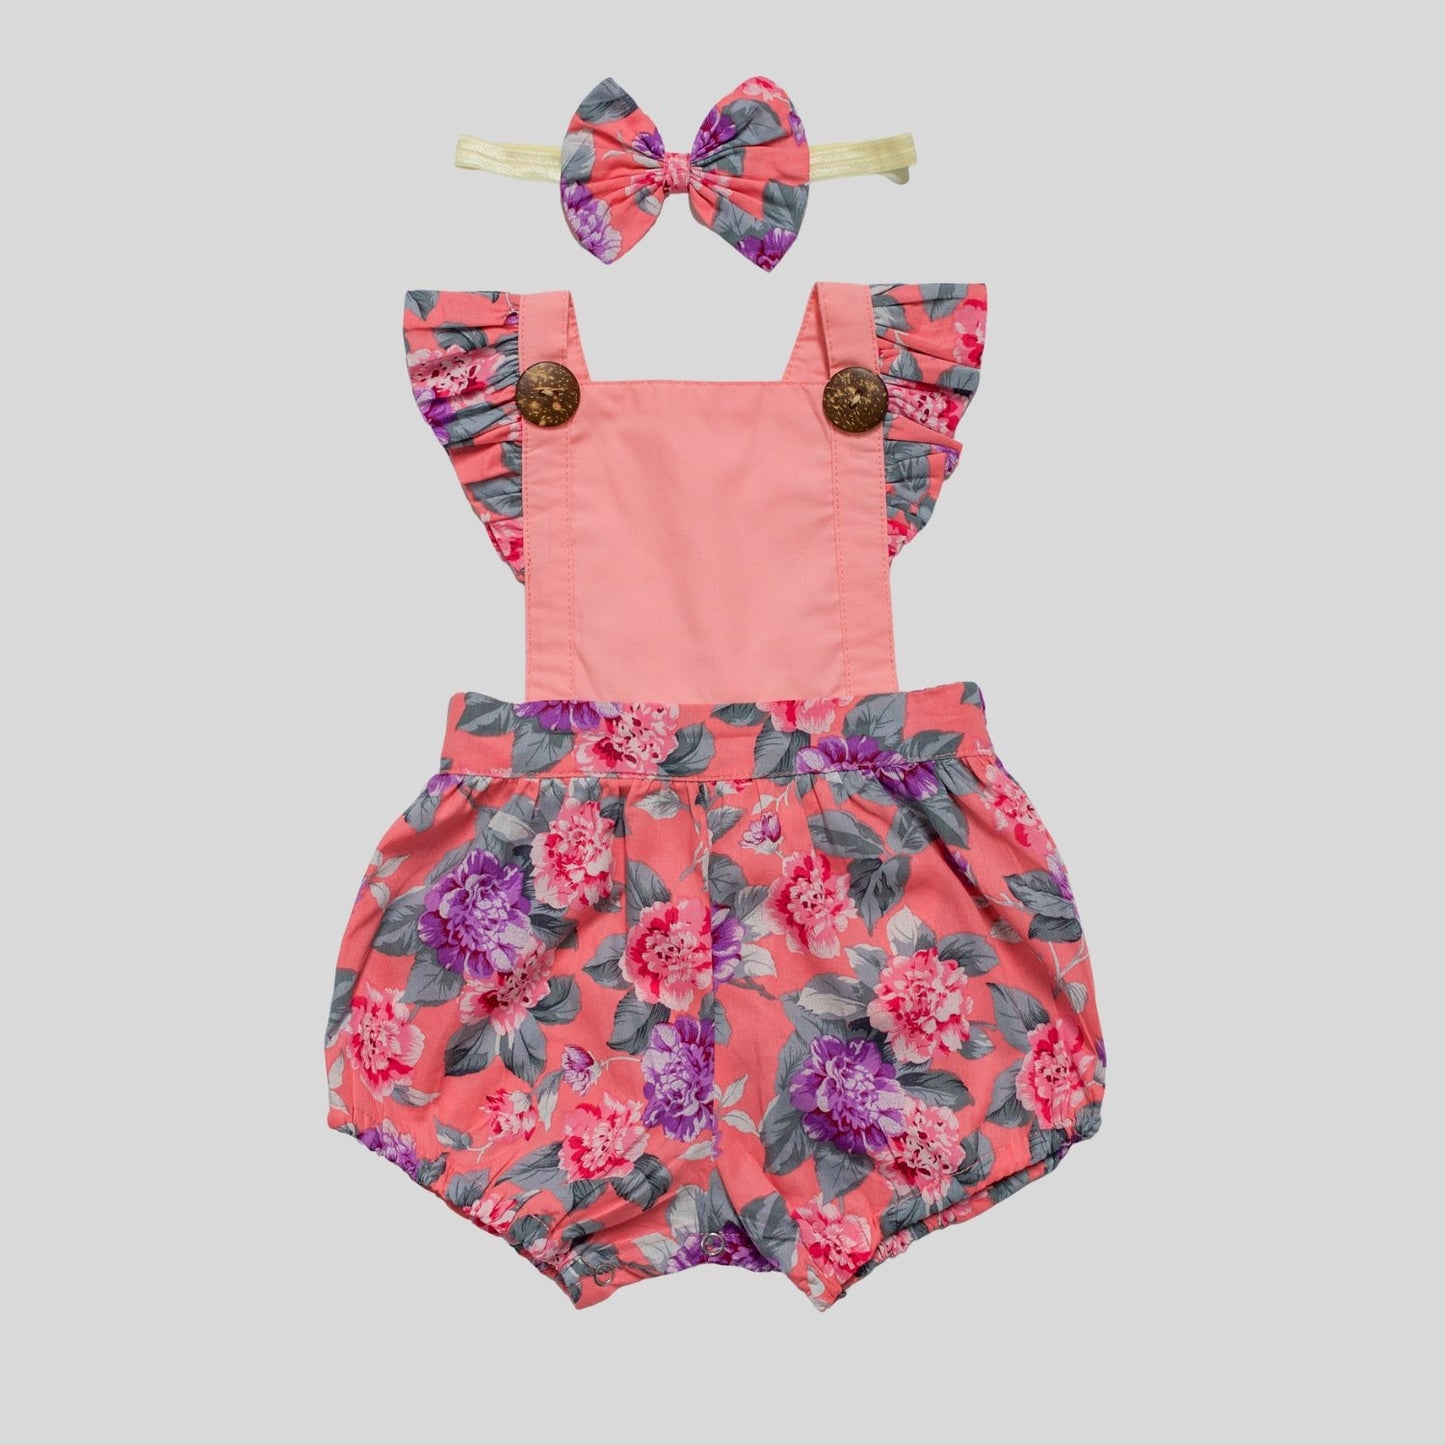 PINK FLORAL BUTTON ROMPER OUTFIT FOR BABY GIRL TODDLER AUSTRALIA